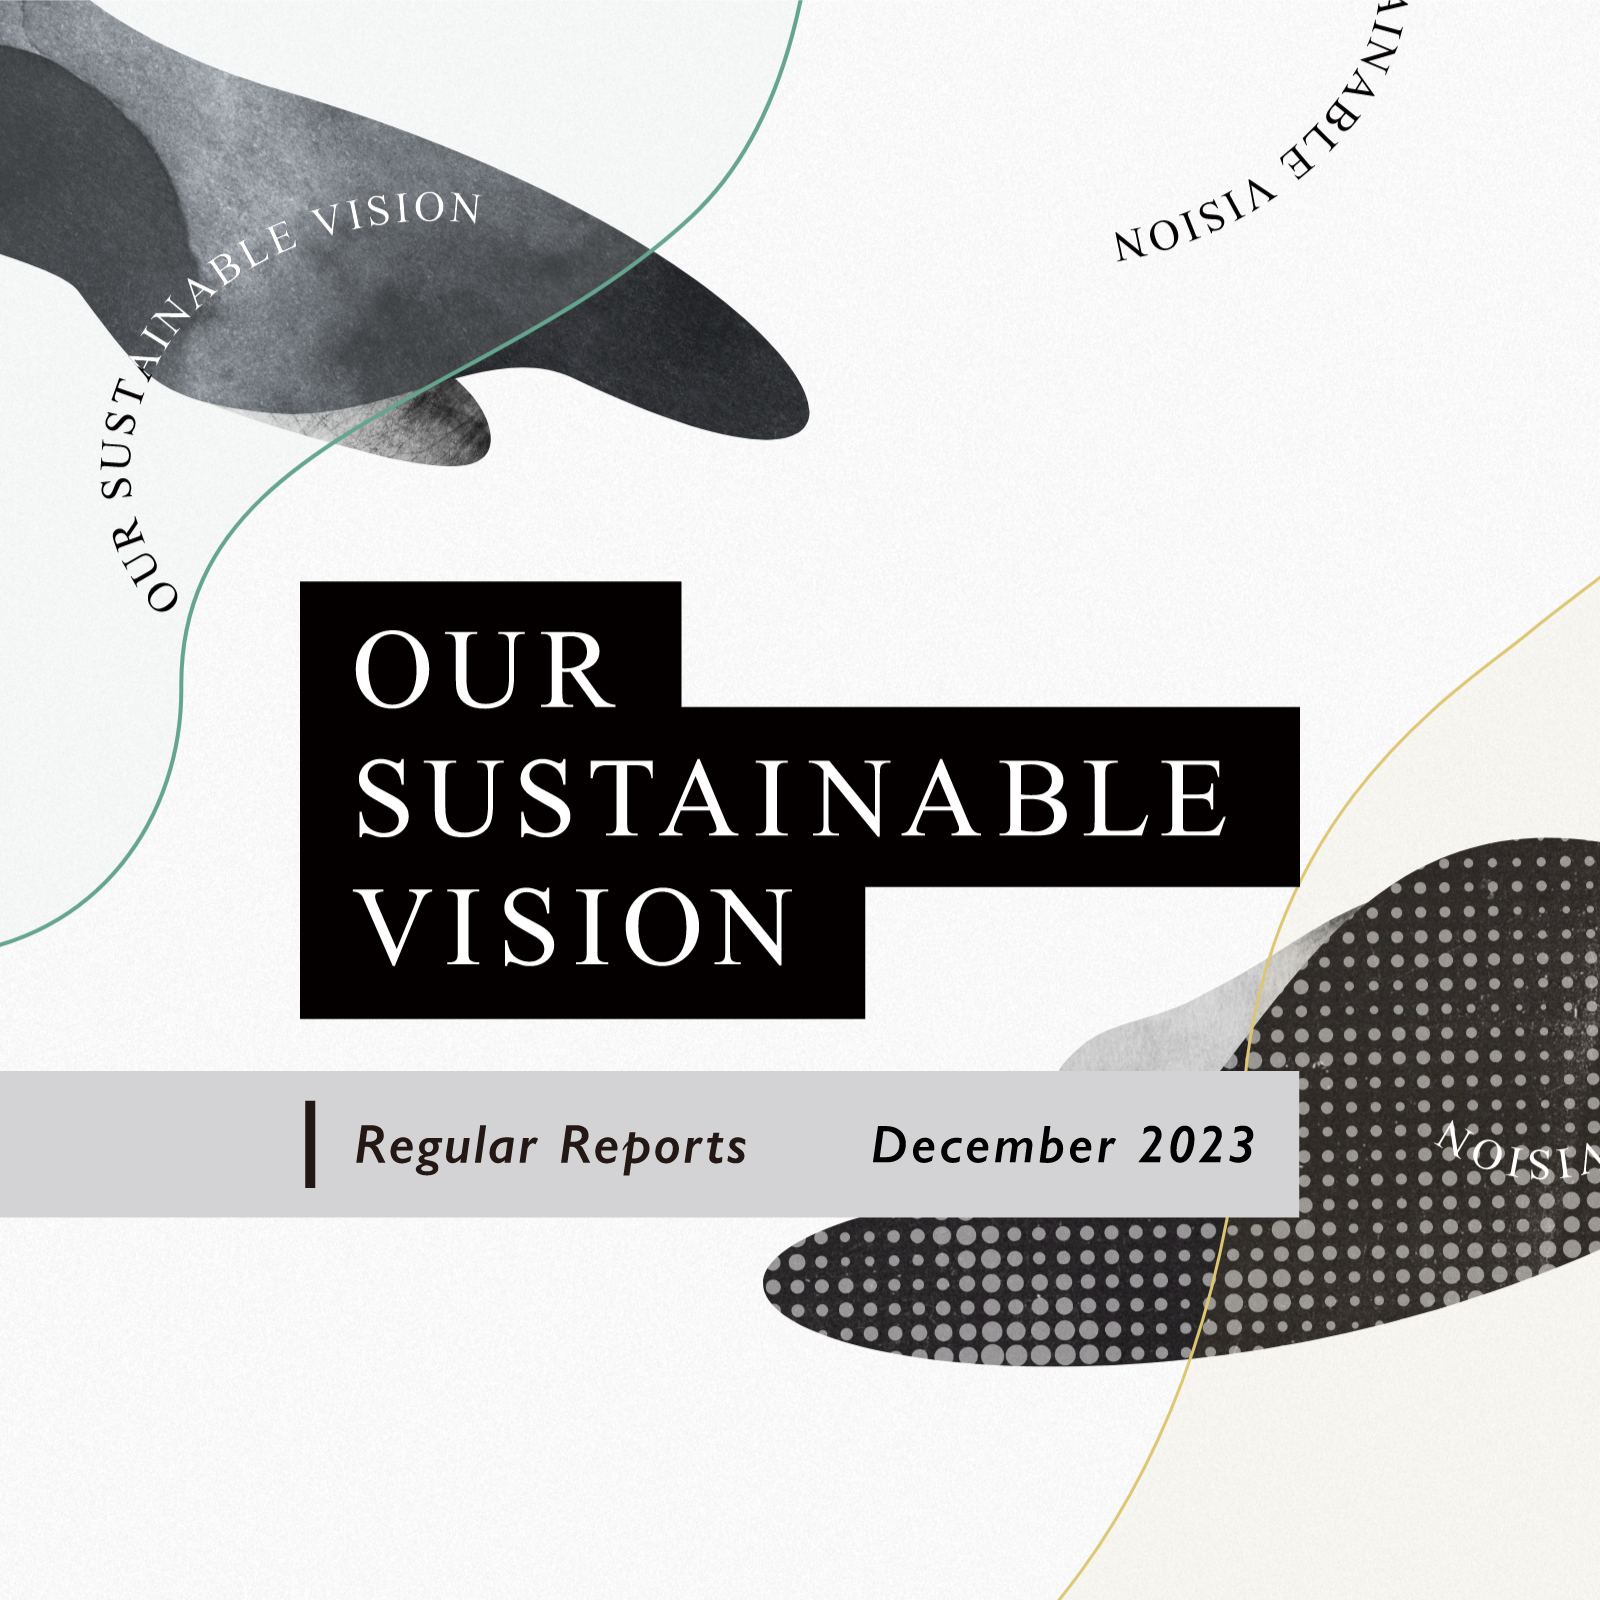 【OUR SUSTAINABLE VISION】Monthly Report_December 2023 12.26(TUE.)